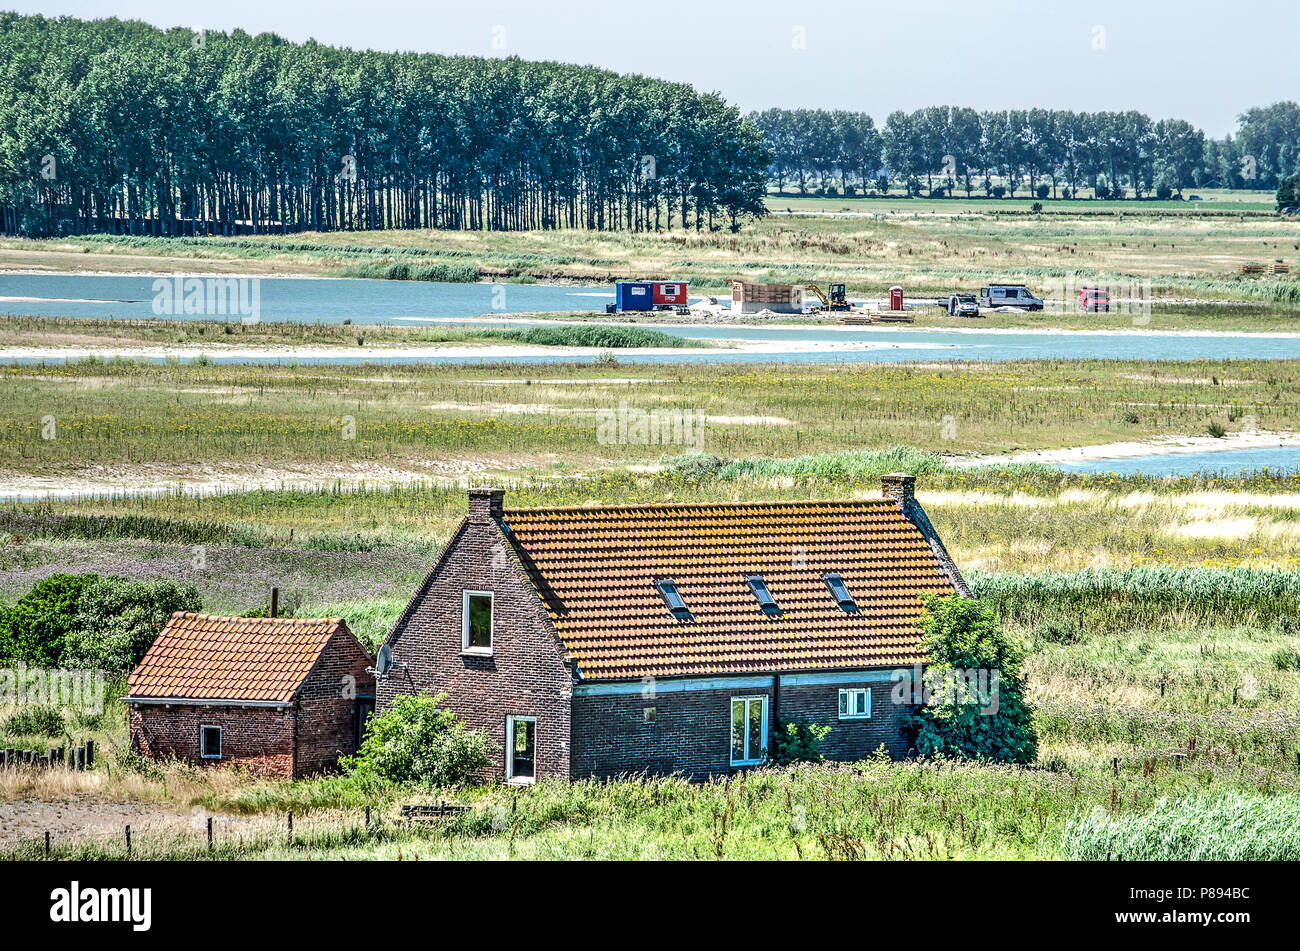 Municipality of Sluis, the Netherlands, July 2, 2018: work in porgress on Waterdunen project, combining tidal nature, recreation and coastal defense Stock Photo